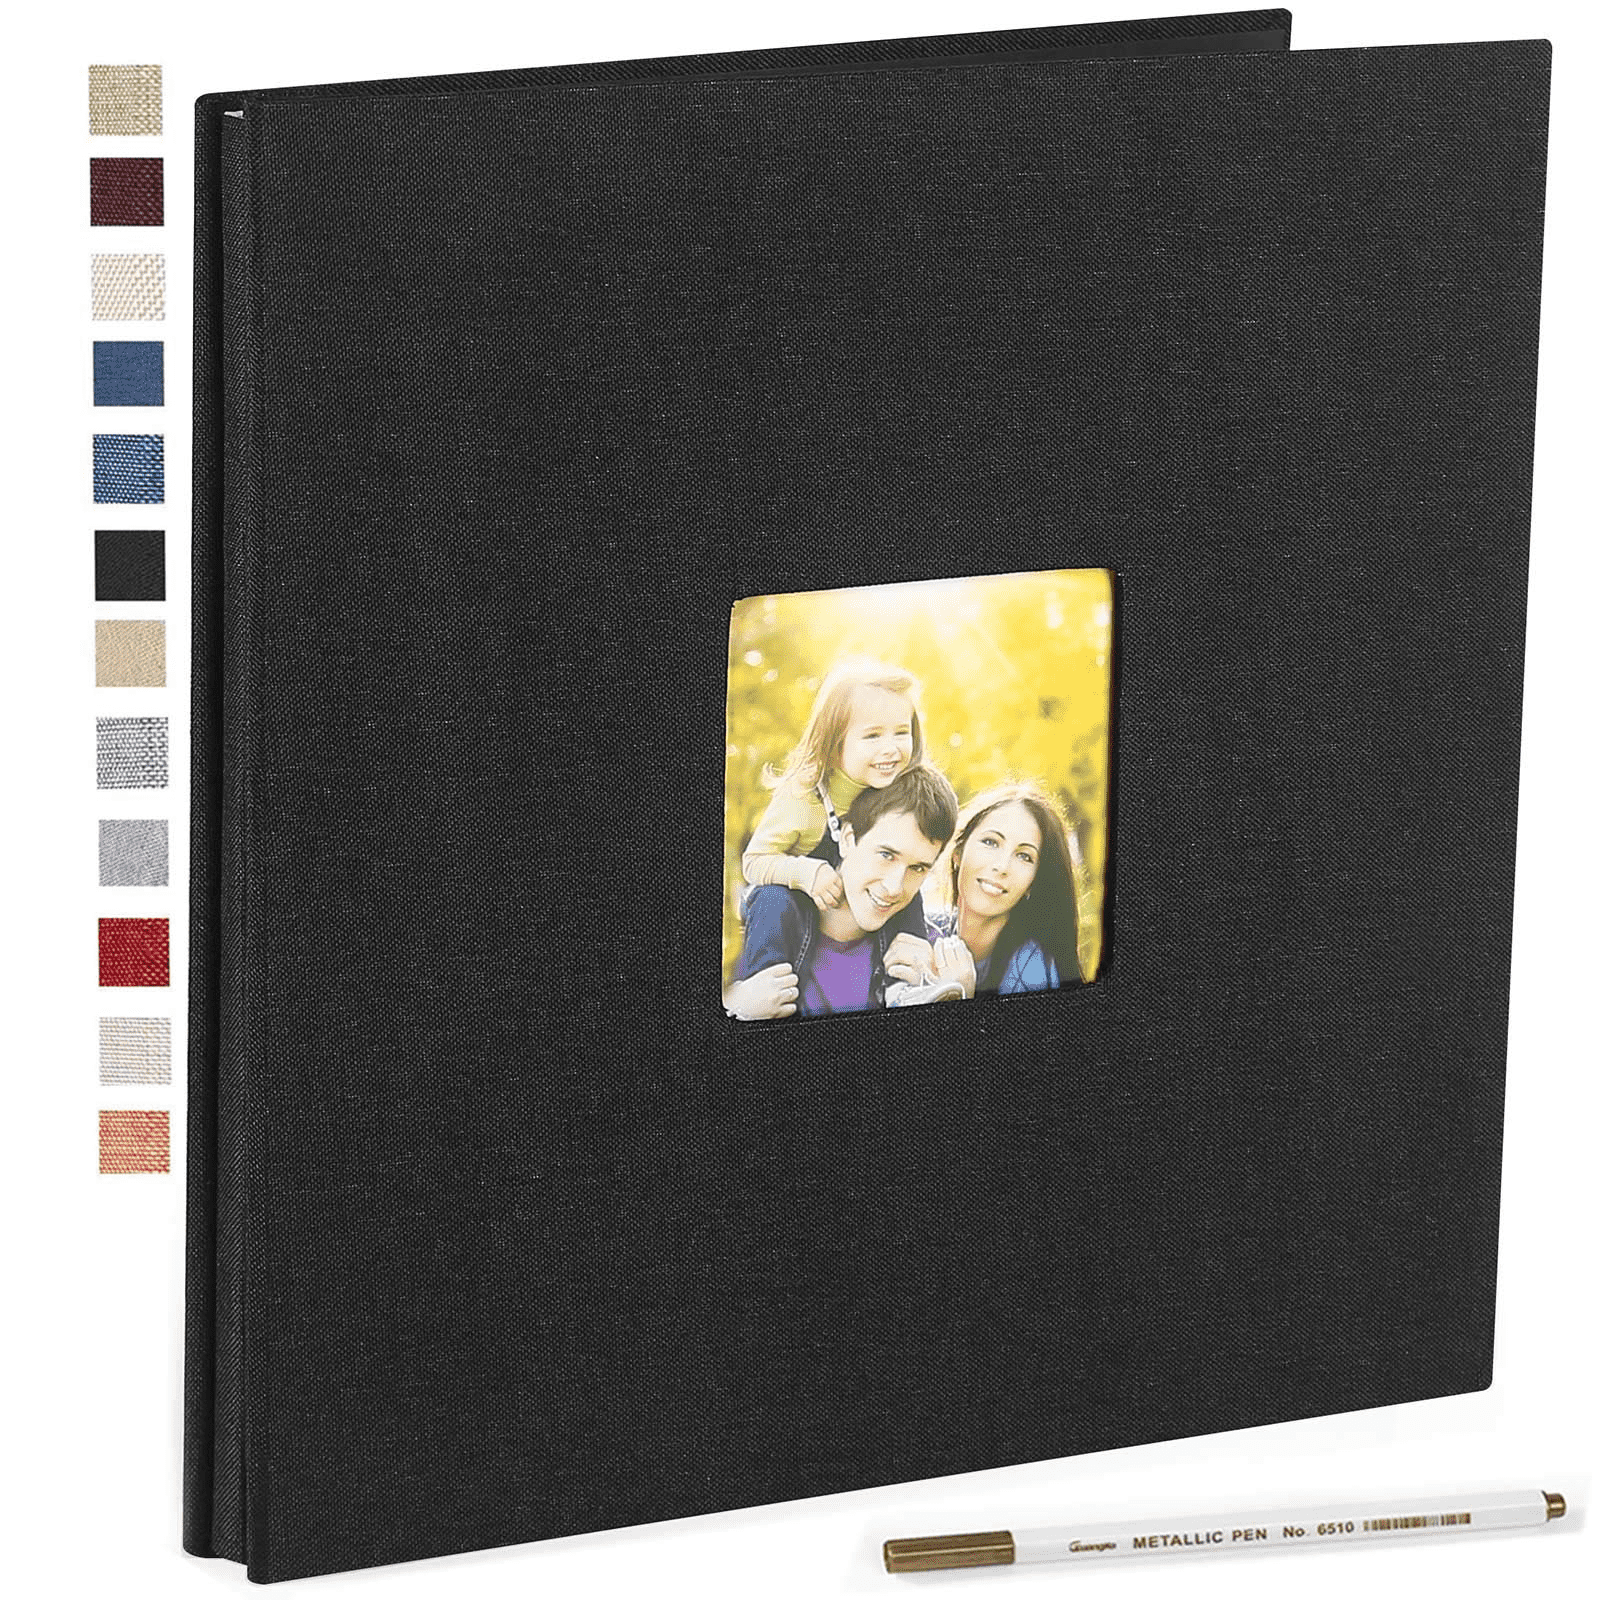 Vienrose Large Photo Album Self Adhesive for 4x6 8x10 10x12 Pictures Linen  Scrapbook Album DIY 40 Blank Pages with A Metallic Pen